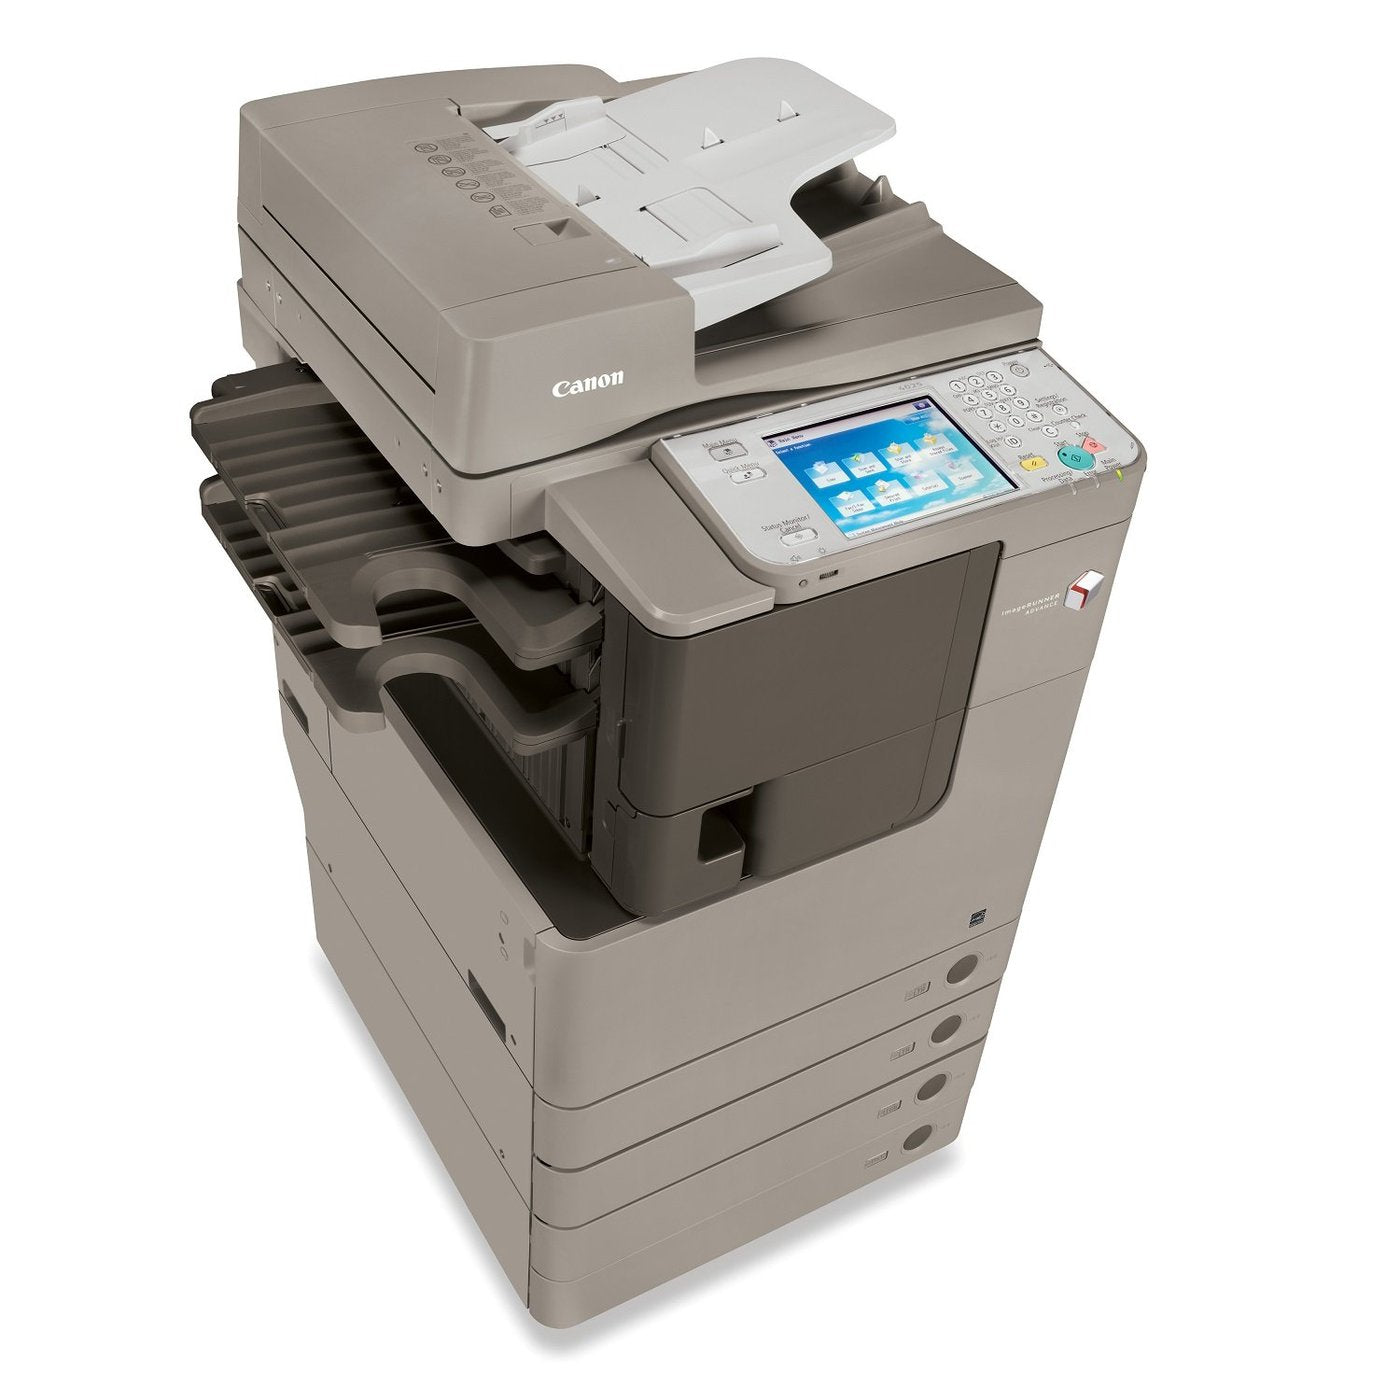 Absolute Toner Canon imageRUNNER ADVANCE 4025 (IRA-4025) Monochrome B/W Multifunction Laser Printer, Copier, Scanner with 4 Paper Cassettes, LCD, 11x17 Showroom Monochrome Copiers